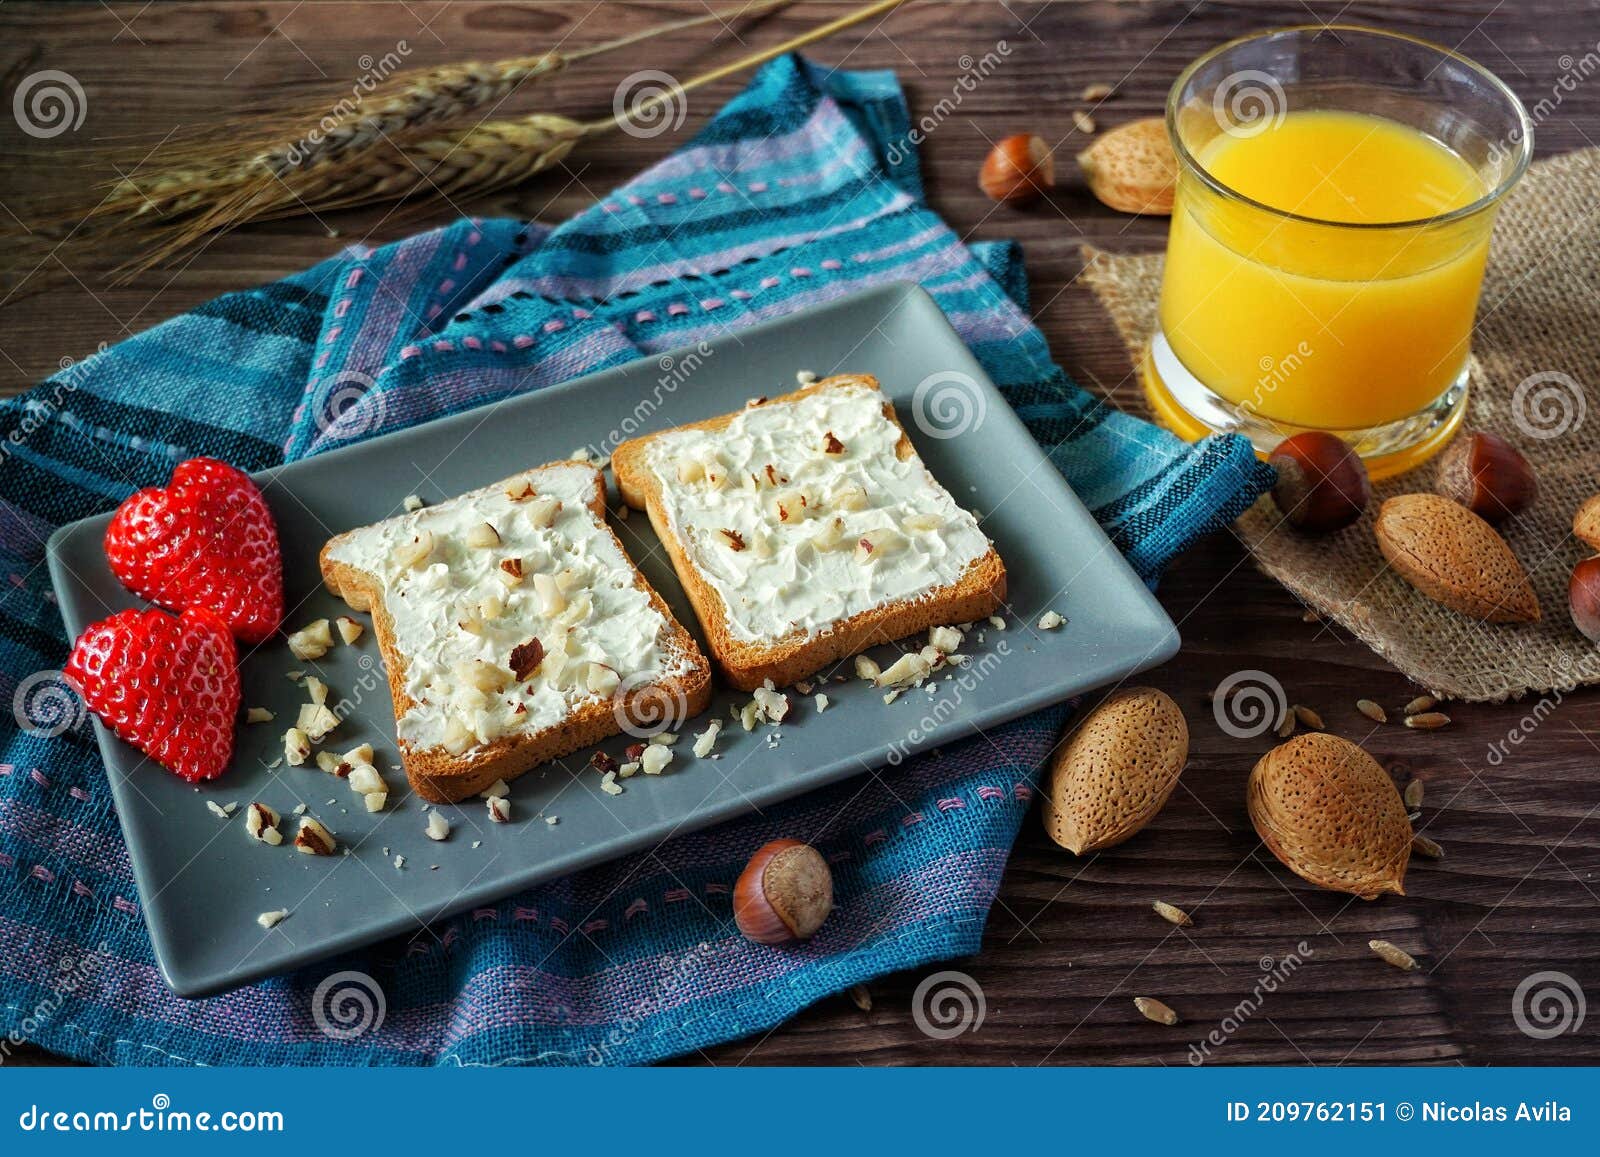 slices of bread with cream cheese, strawberries and juice